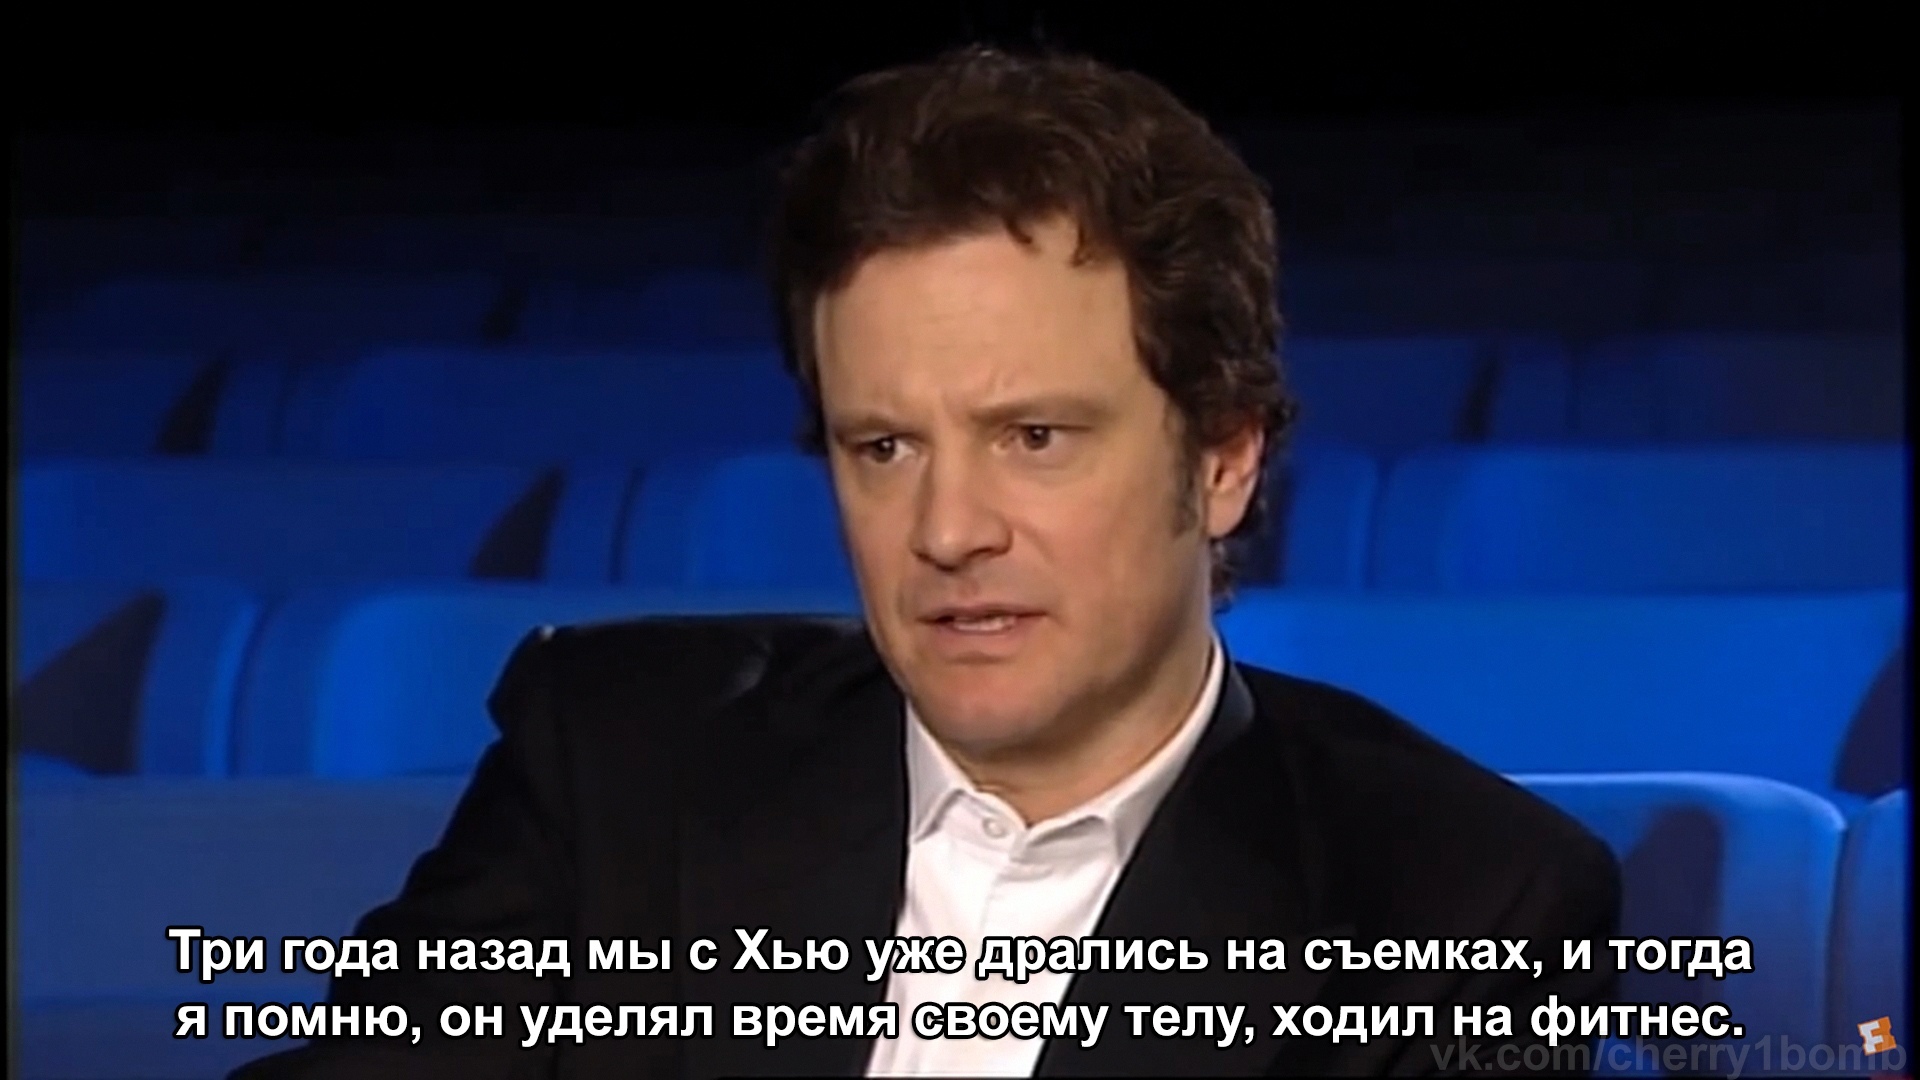 A friend will always tell the truth - Hugh Grant, Colin Firth, Actors and actresses, Storyboard, Celebrities, Behind the scenes, Longpost, Humor, friendship